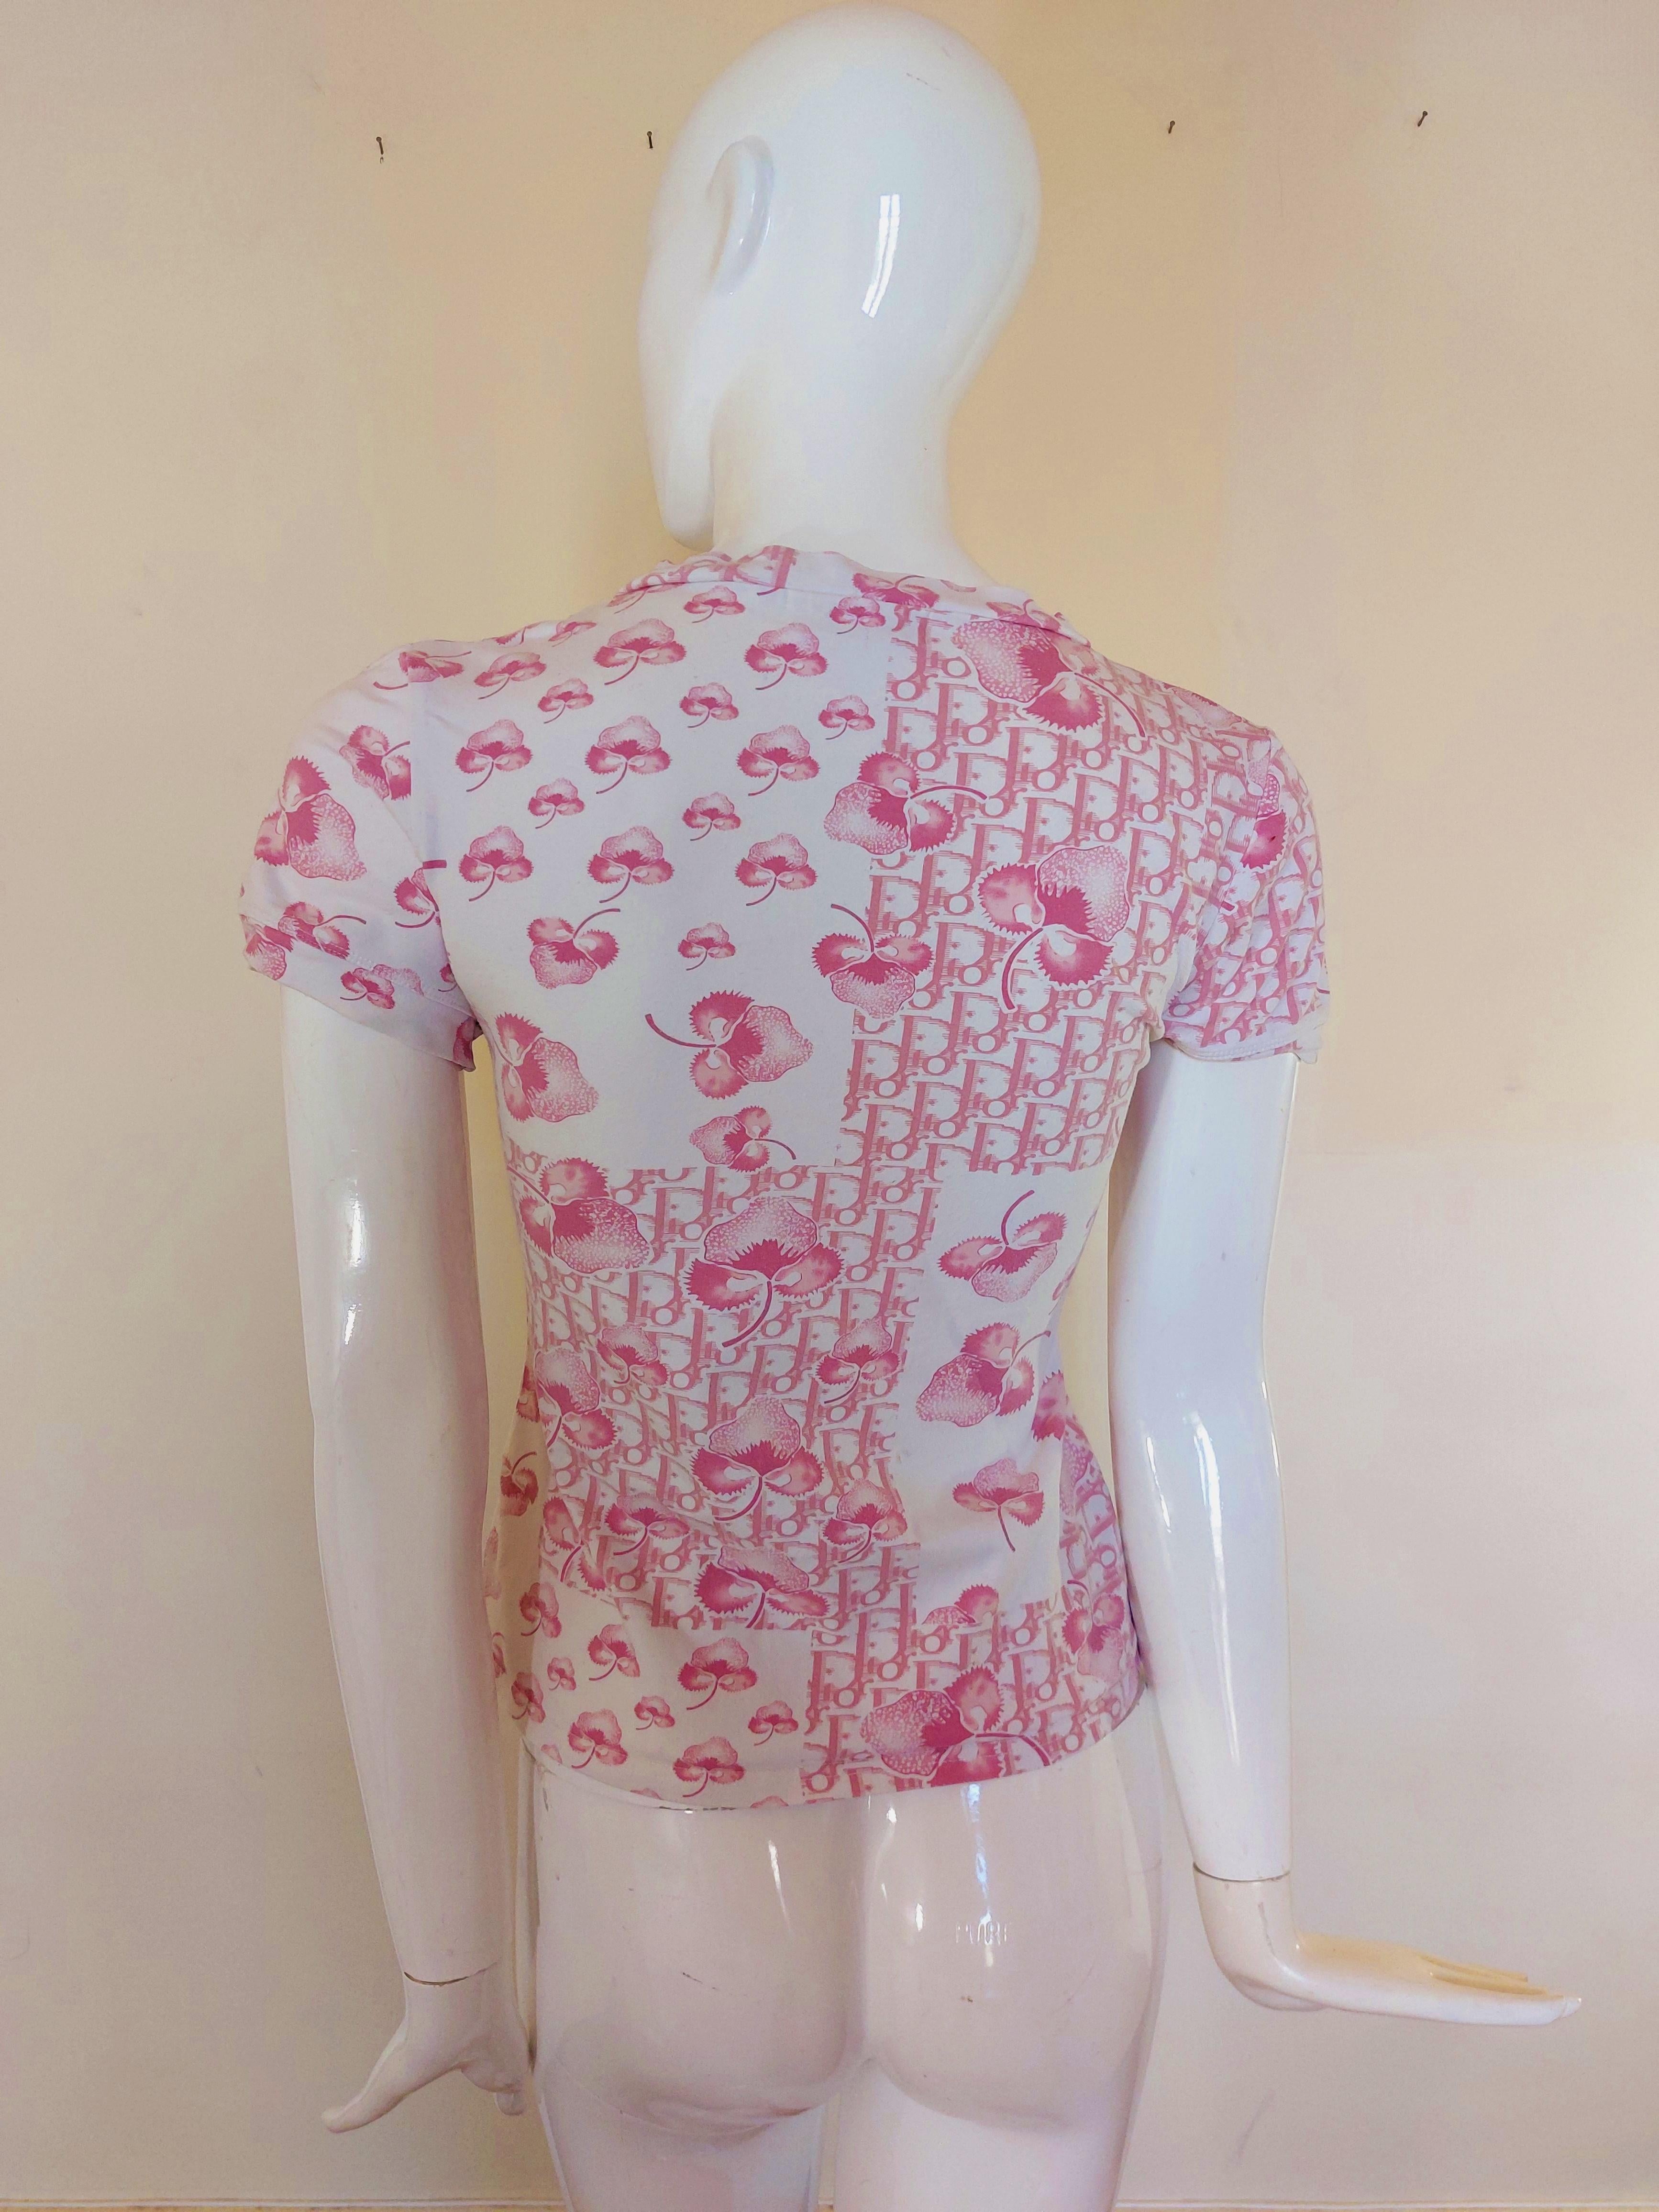 Christian Dior J’adore Cherry Blossom Monogram Floral Logo John Galliano Vintage 90’s 1990 Pink Shirt Top T-Shirt Tee Iconic Collector
Vintage Collector’s Item Christian Dior Cherry Blossom Monogram Pink Shirt Top

Pristine condition!!!
No flaws!!!